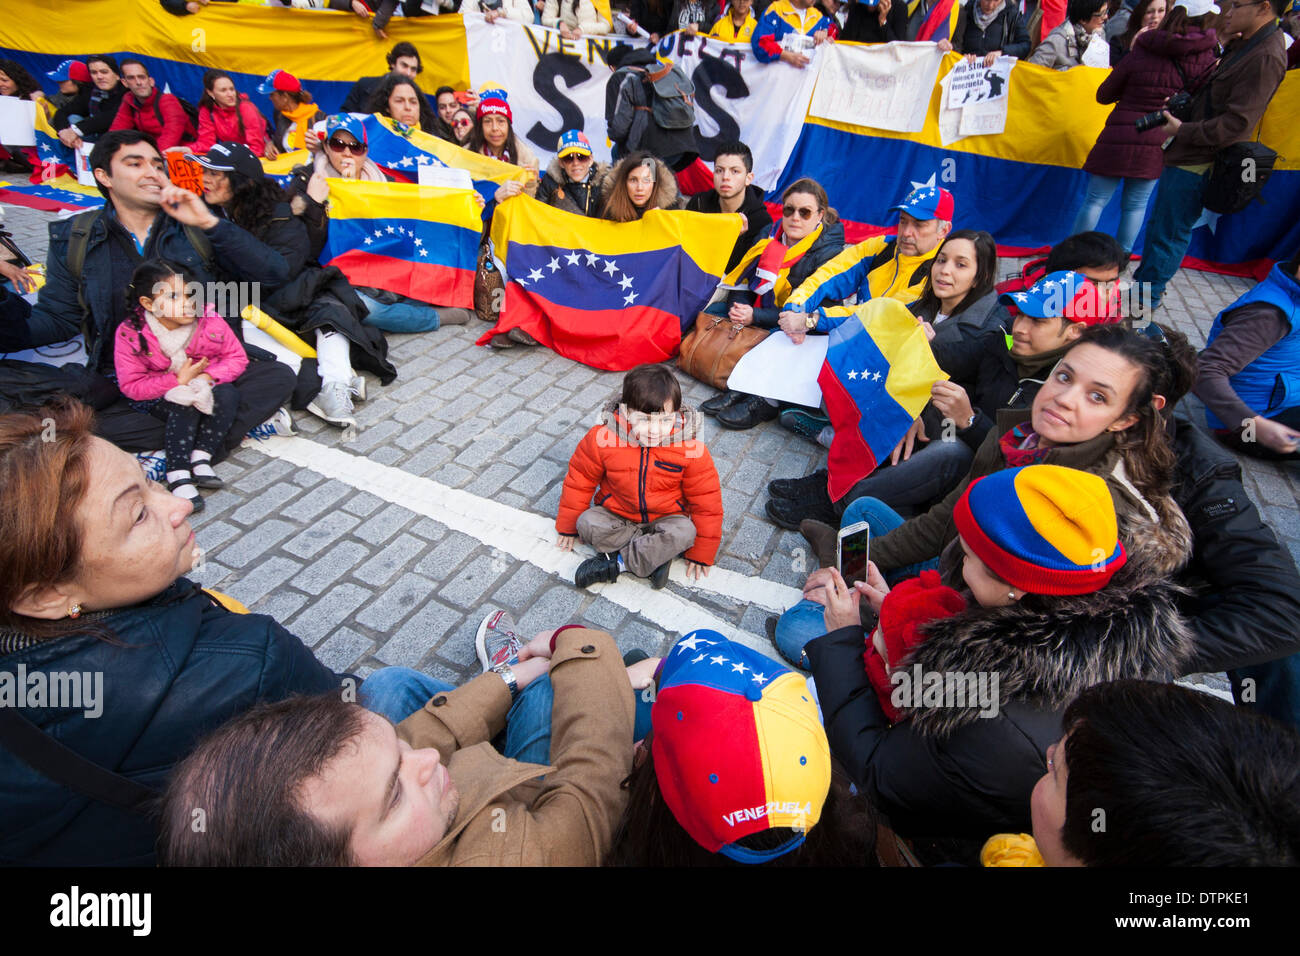 London, UK. 22nd February 2014. Hundreds of Venezuelans protest outside the BBC in London against what they say is a news blackout on developments in their country where student demonstrations have led to at least 10 deaths and hundreds of arrests. Credit:  Paul Davey/Alamy Live News Stock Photo